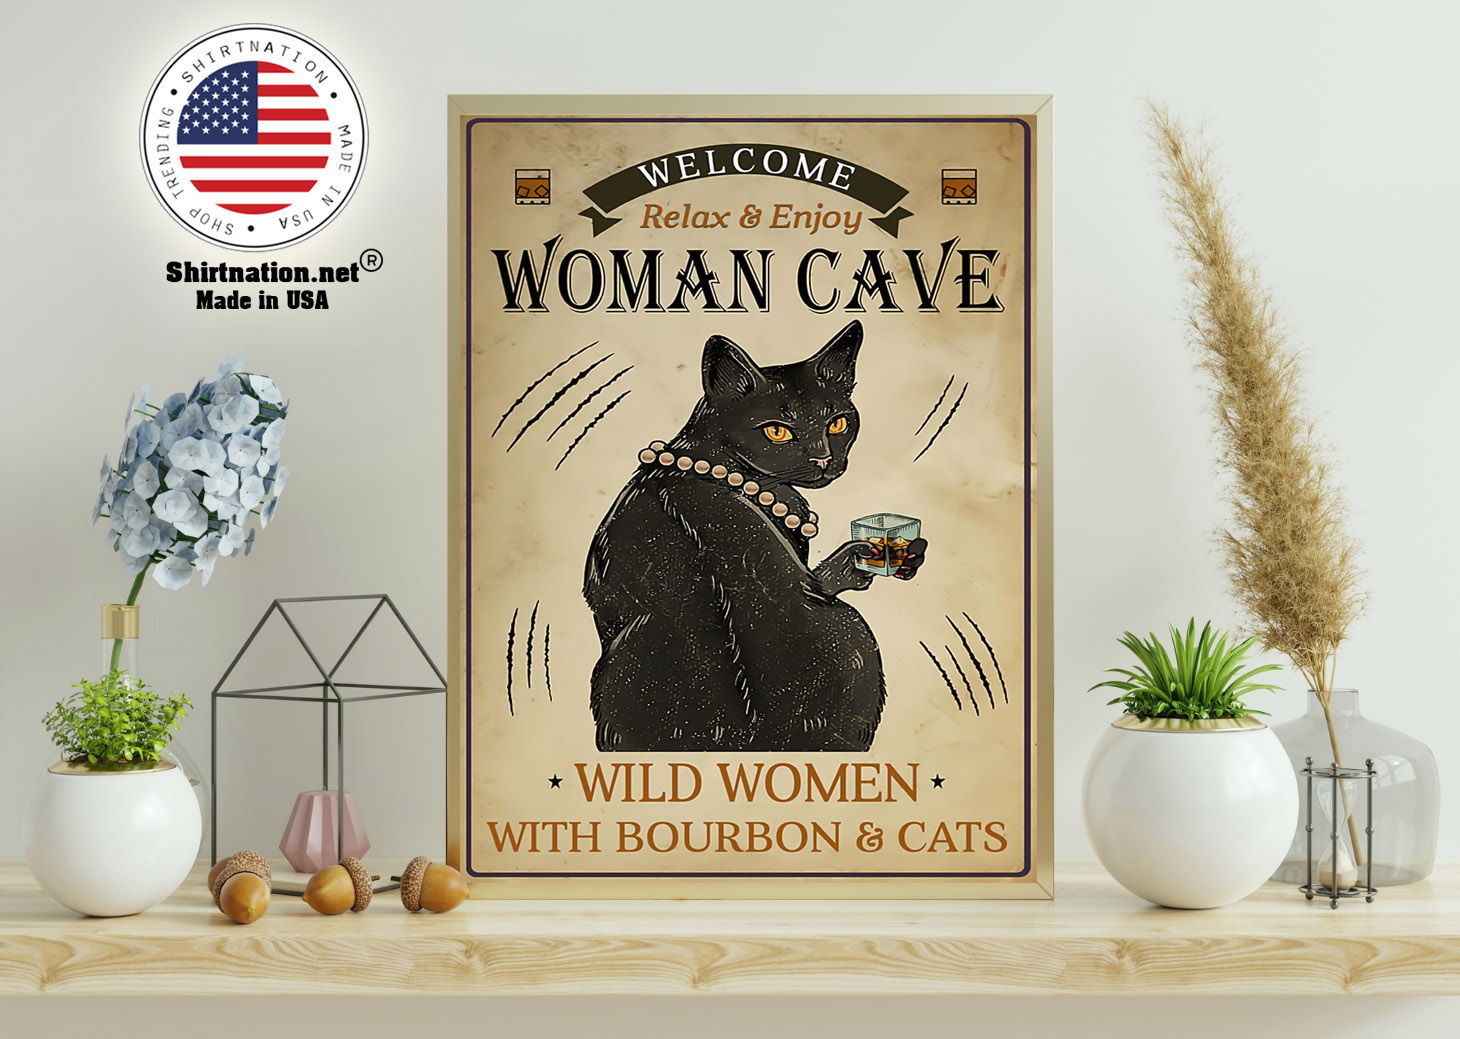 Welcome relax enjoy woman cave will women with bourbon and cats poster 11